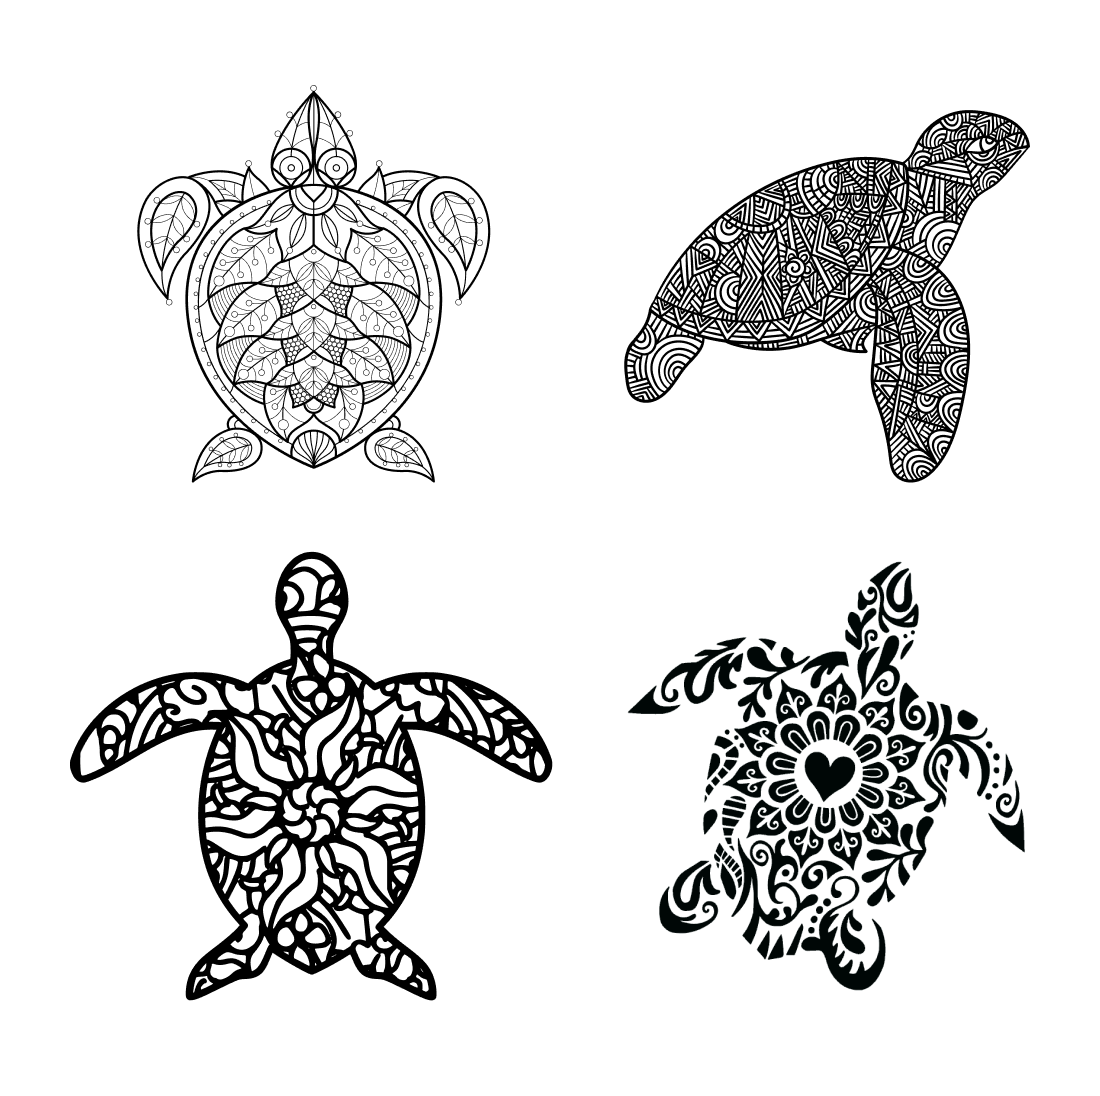 Four turtle designs in black and white on a white background.